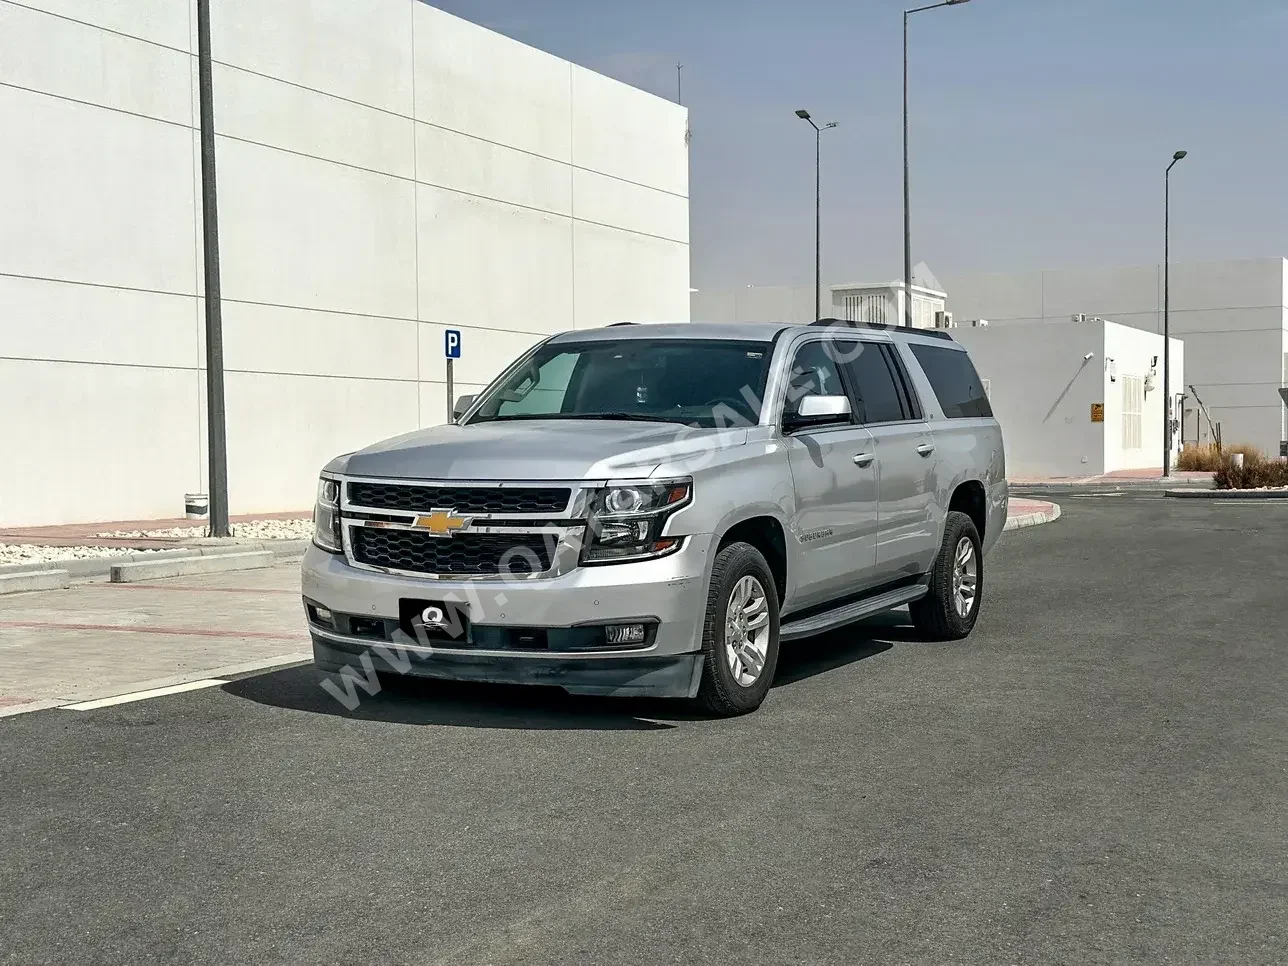 Chevrolet  Suburban  LT  2017  Automatic  85,000 Km  8 Cylinder  Four Wheel Drive (4WD)  SUV  Silver